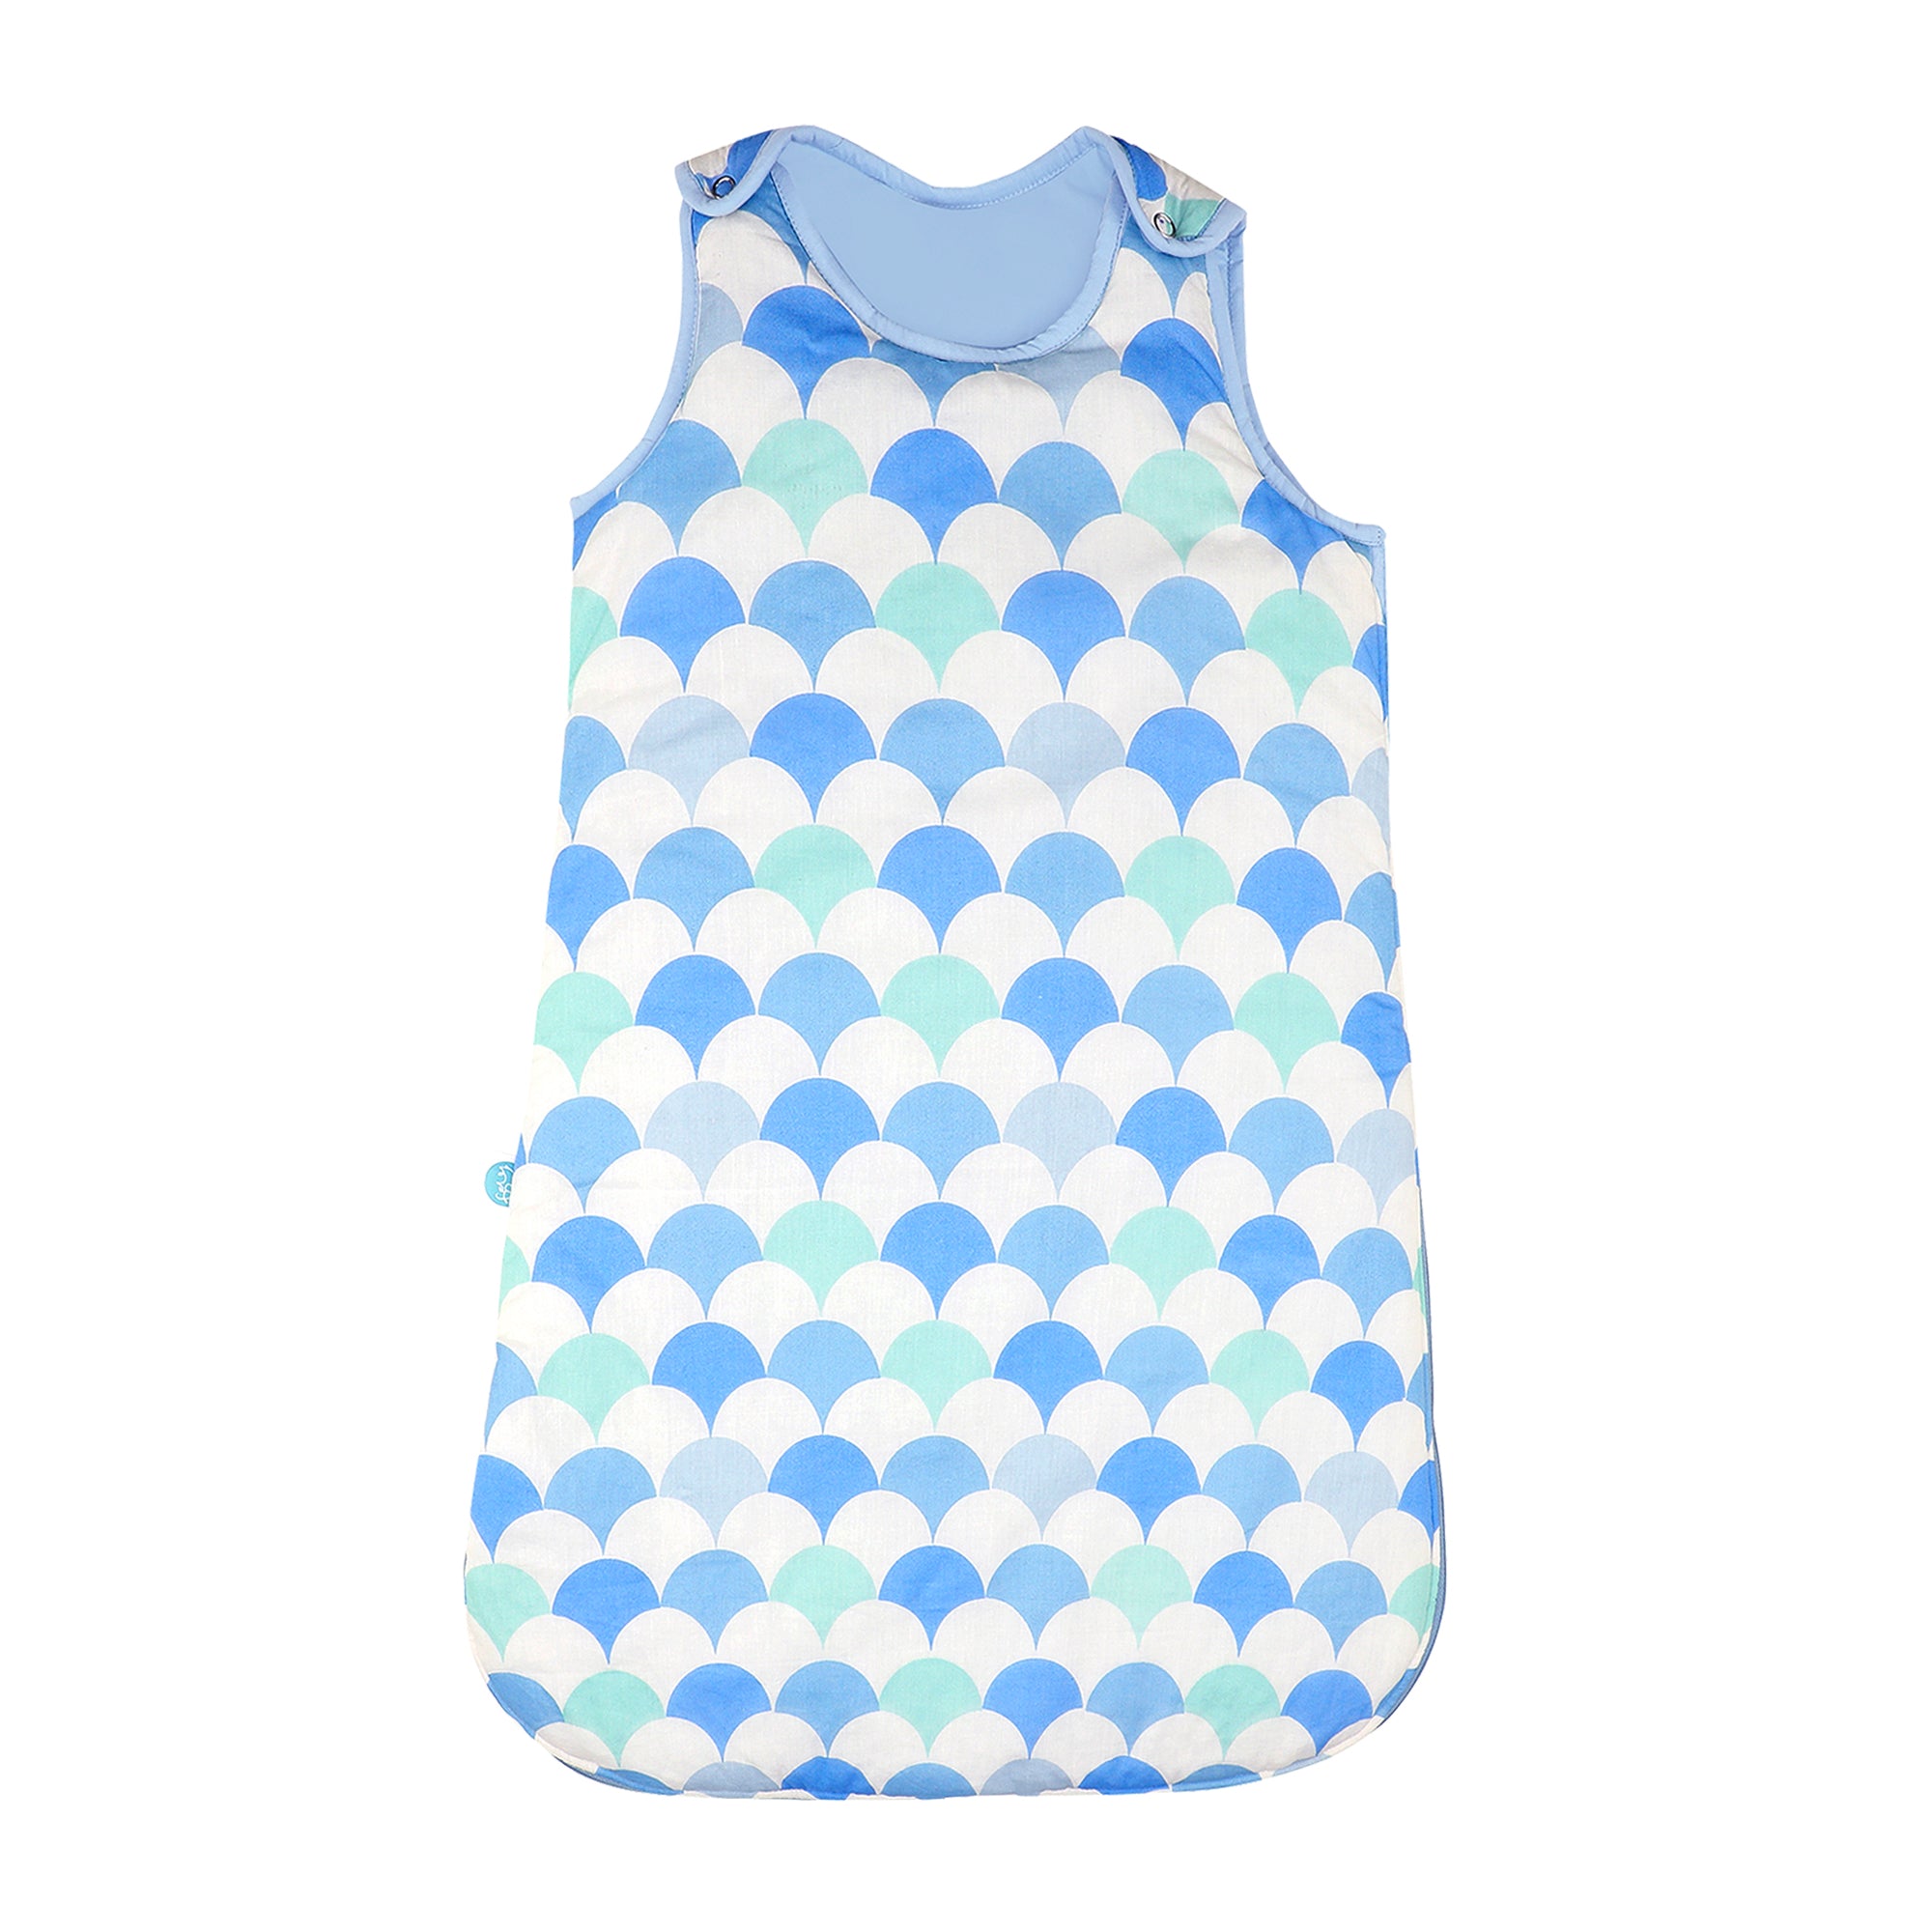 ICY BLUE SCALLOP SLEEPING BAG (2-4 MONTHS)